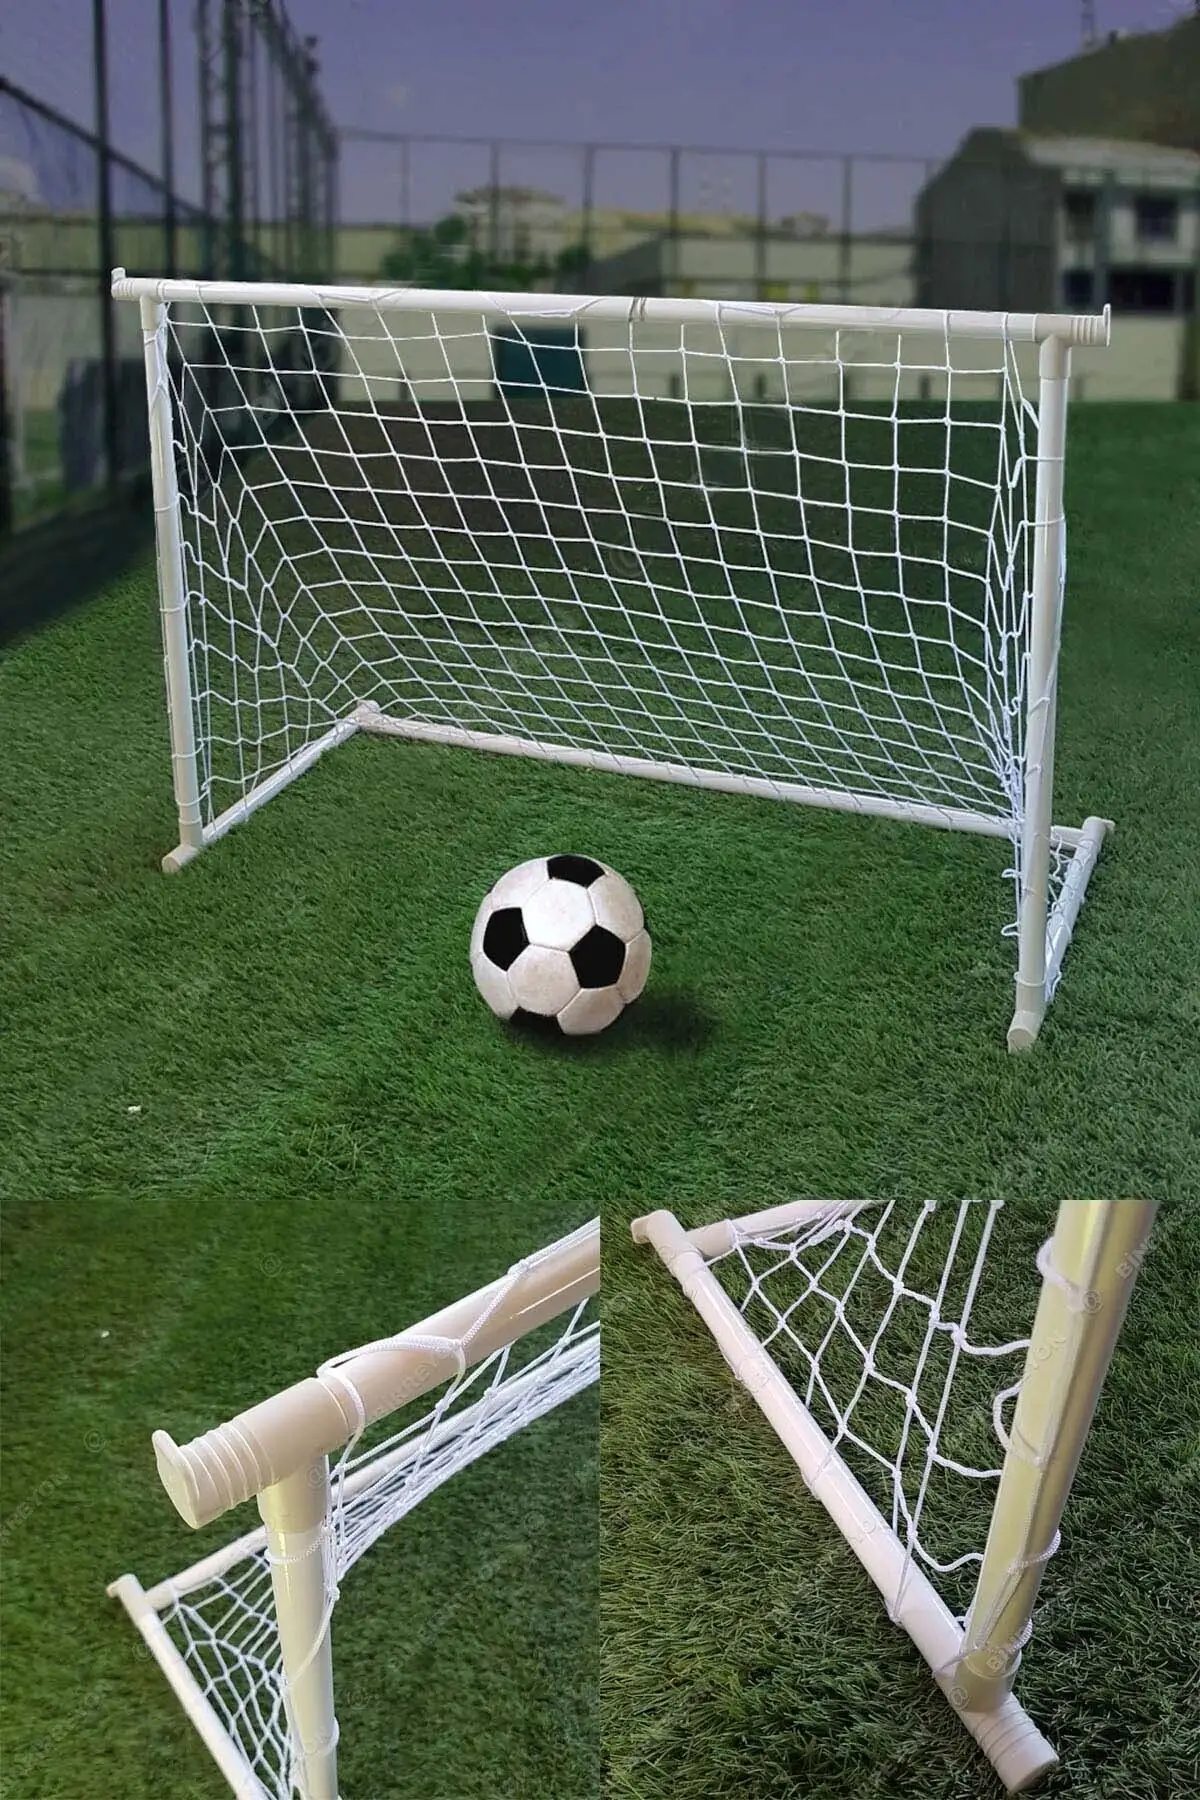 Miniature Football Goal Can Be Disassembled Easily Installed Can Be Disassembled And Used In Every Area